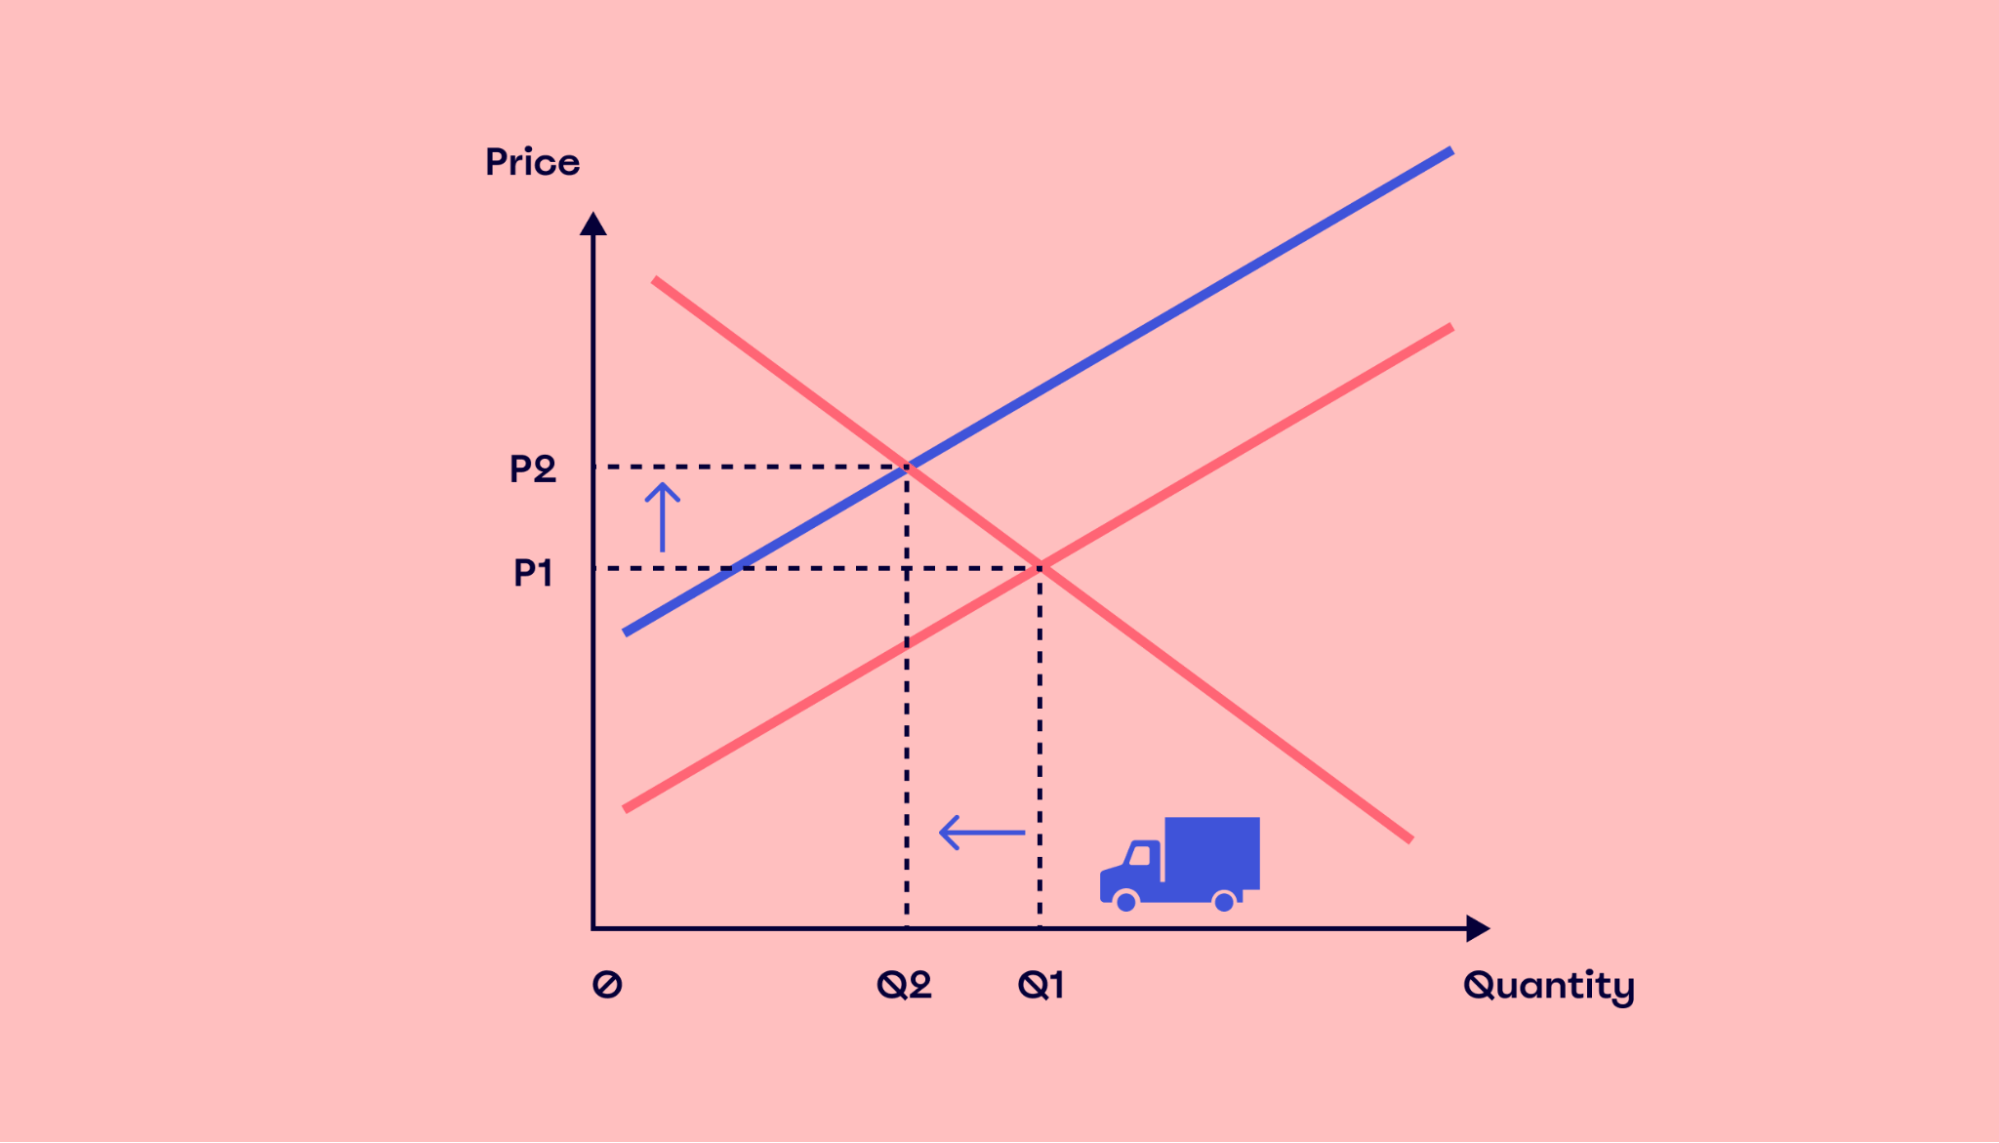 price increases when supply decreases and demand is constant